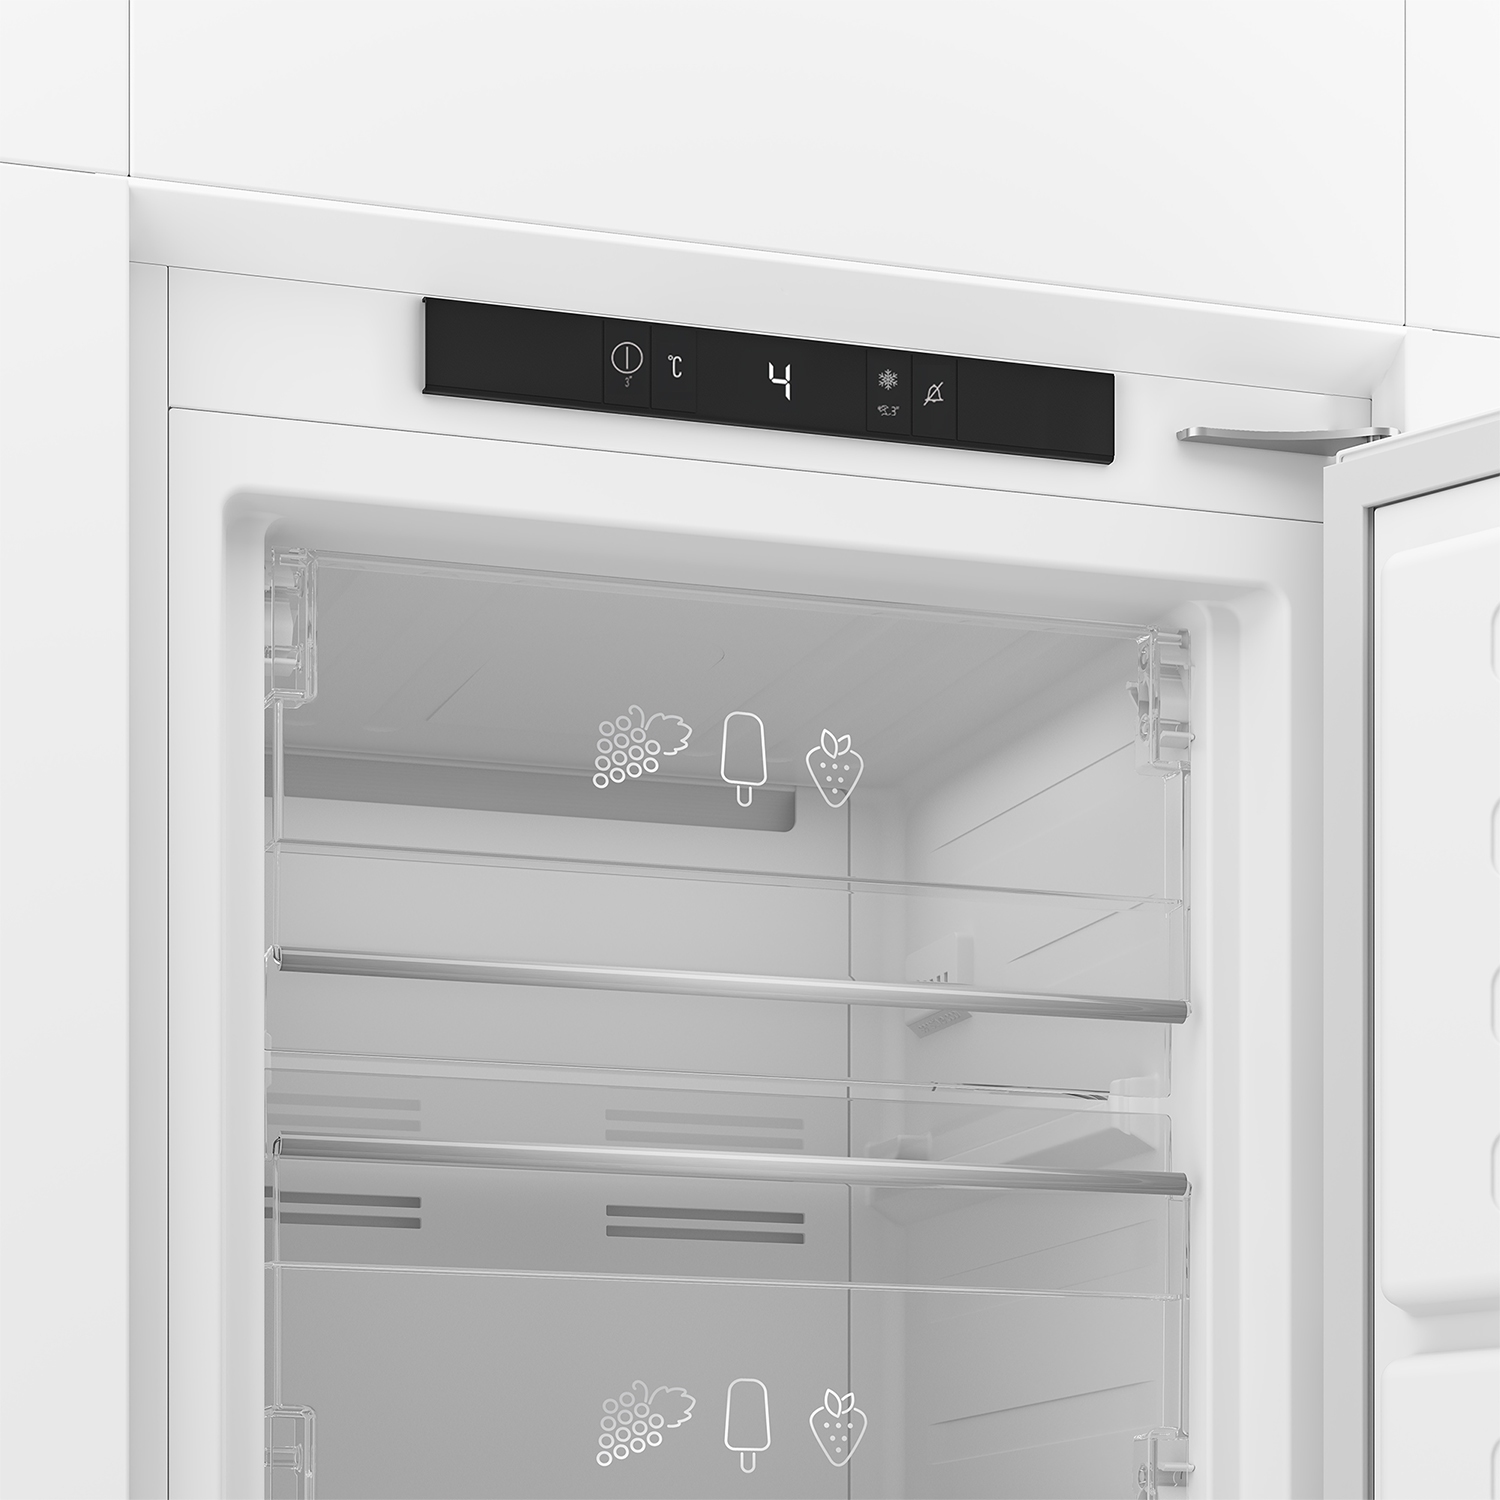 Blomberg FNT3454I 54cm Integrated Frost Free Tall Freezer - White - 1